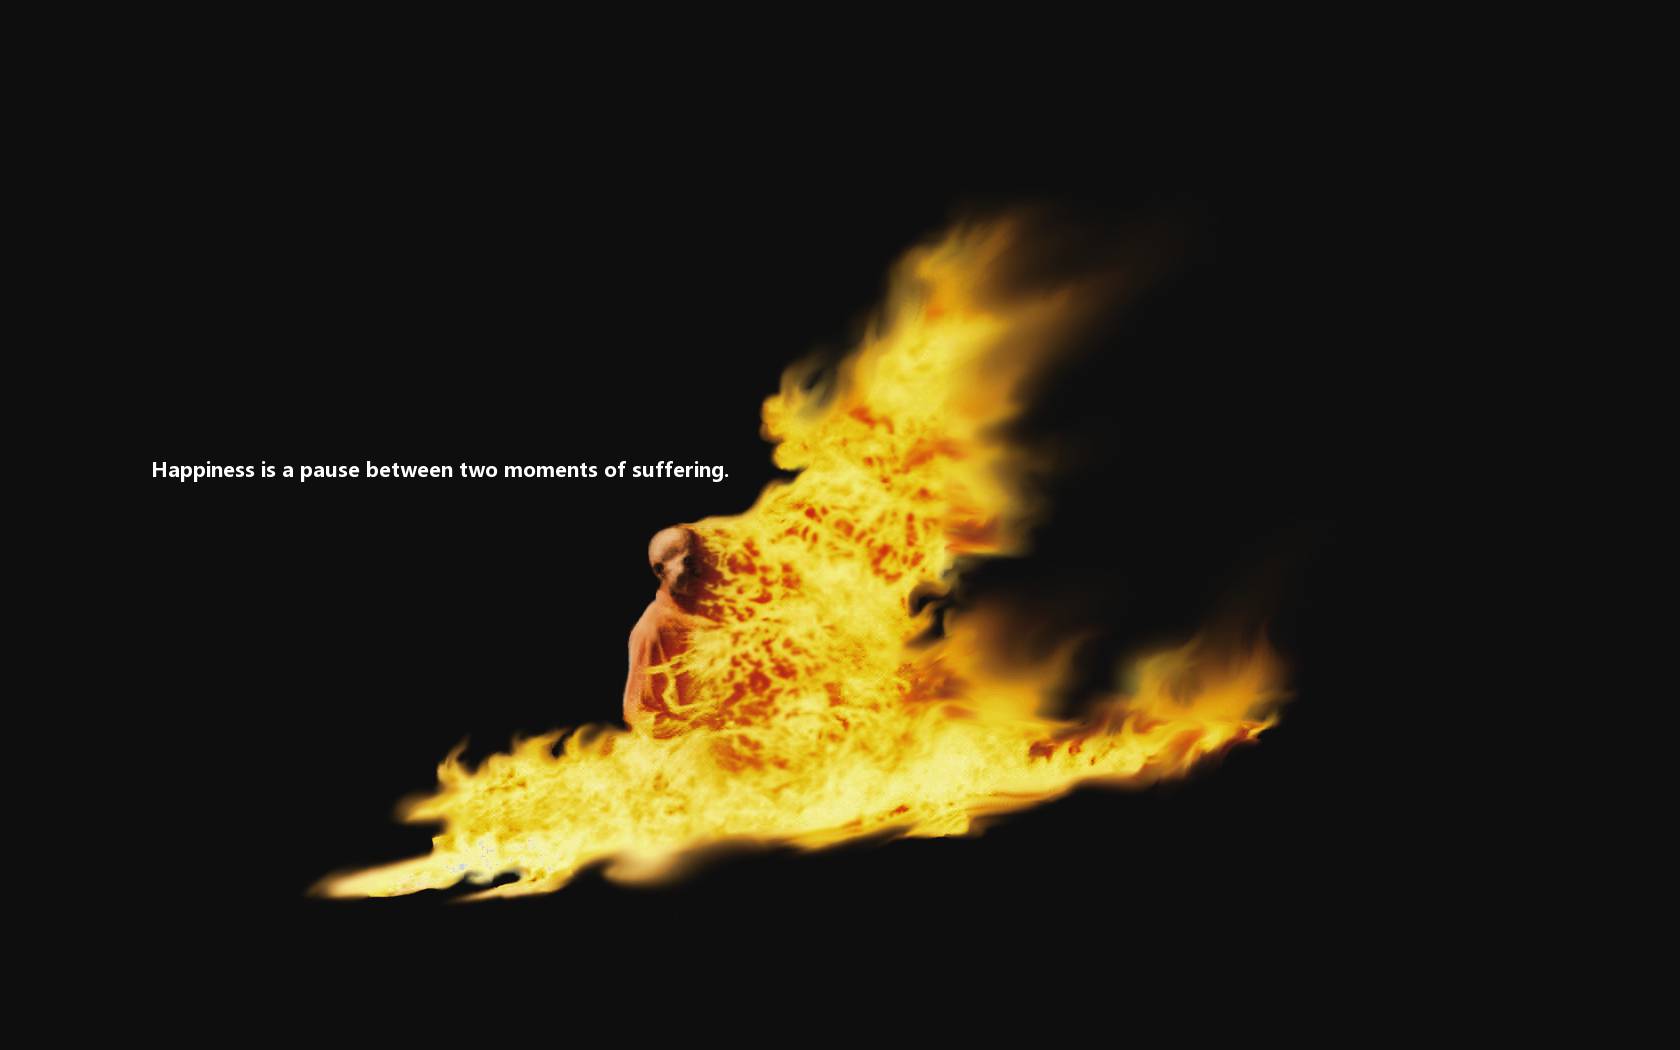 Happy fire burning quotes suicide wallpaper - - High resolution